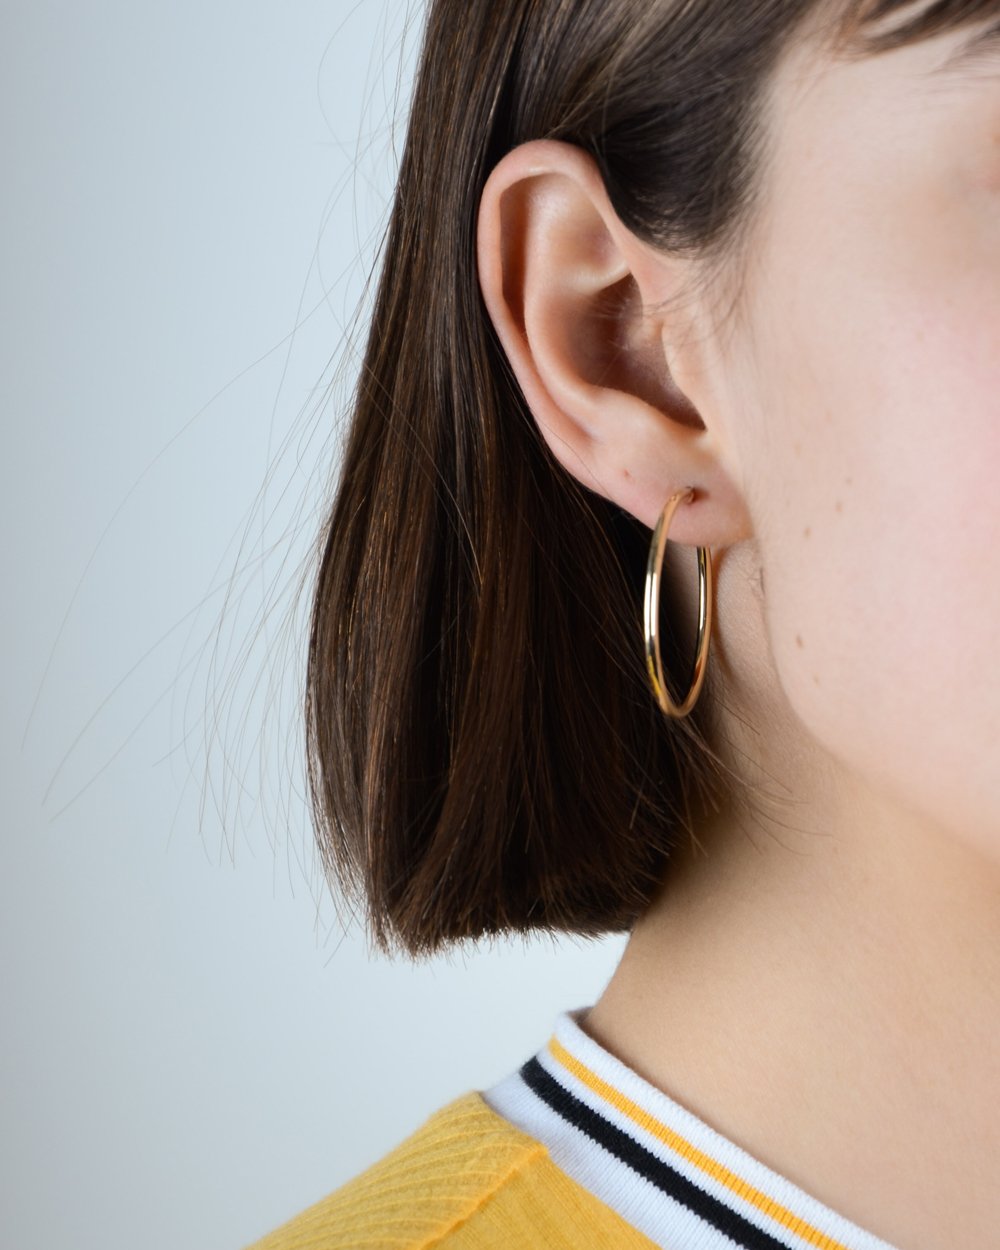 Yellow Chimes Gold-Toned Geometric Stainless Steel Hoop Earrings: Buy  Yellow Chimes Gold-Toned Geometric Stainless Steel Hoop Earrings Online at  Best Price in India | Nykaa